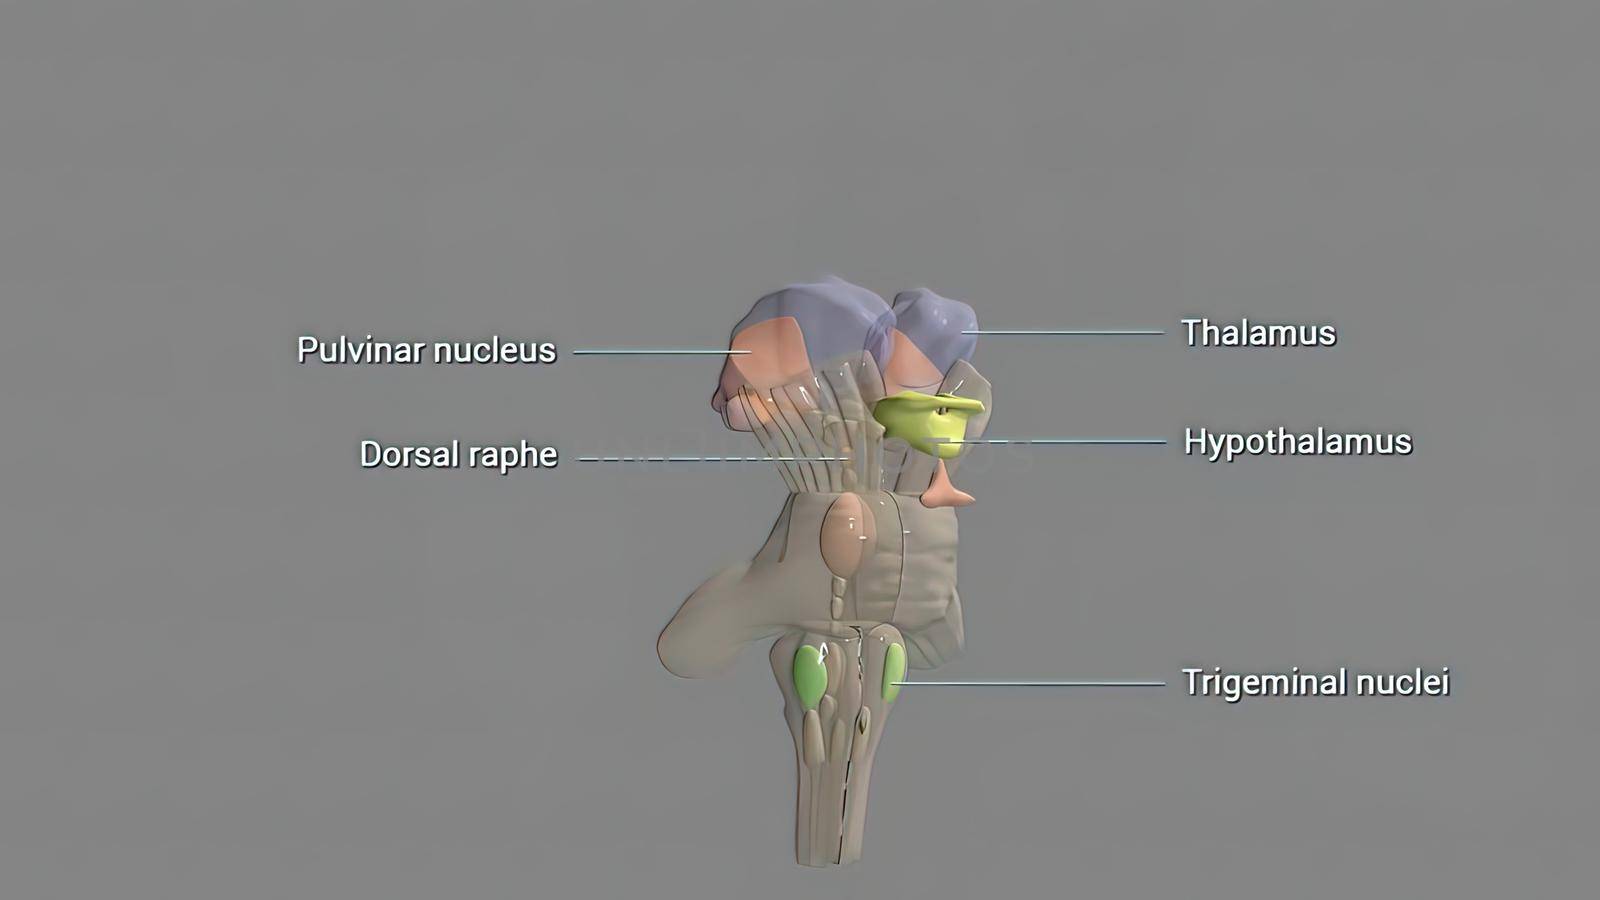 The hypothalamus, highlighted in red, is responsible for the homeostatic control of the body's metabolic, vascular, nervous and endocrine states 3d illustration